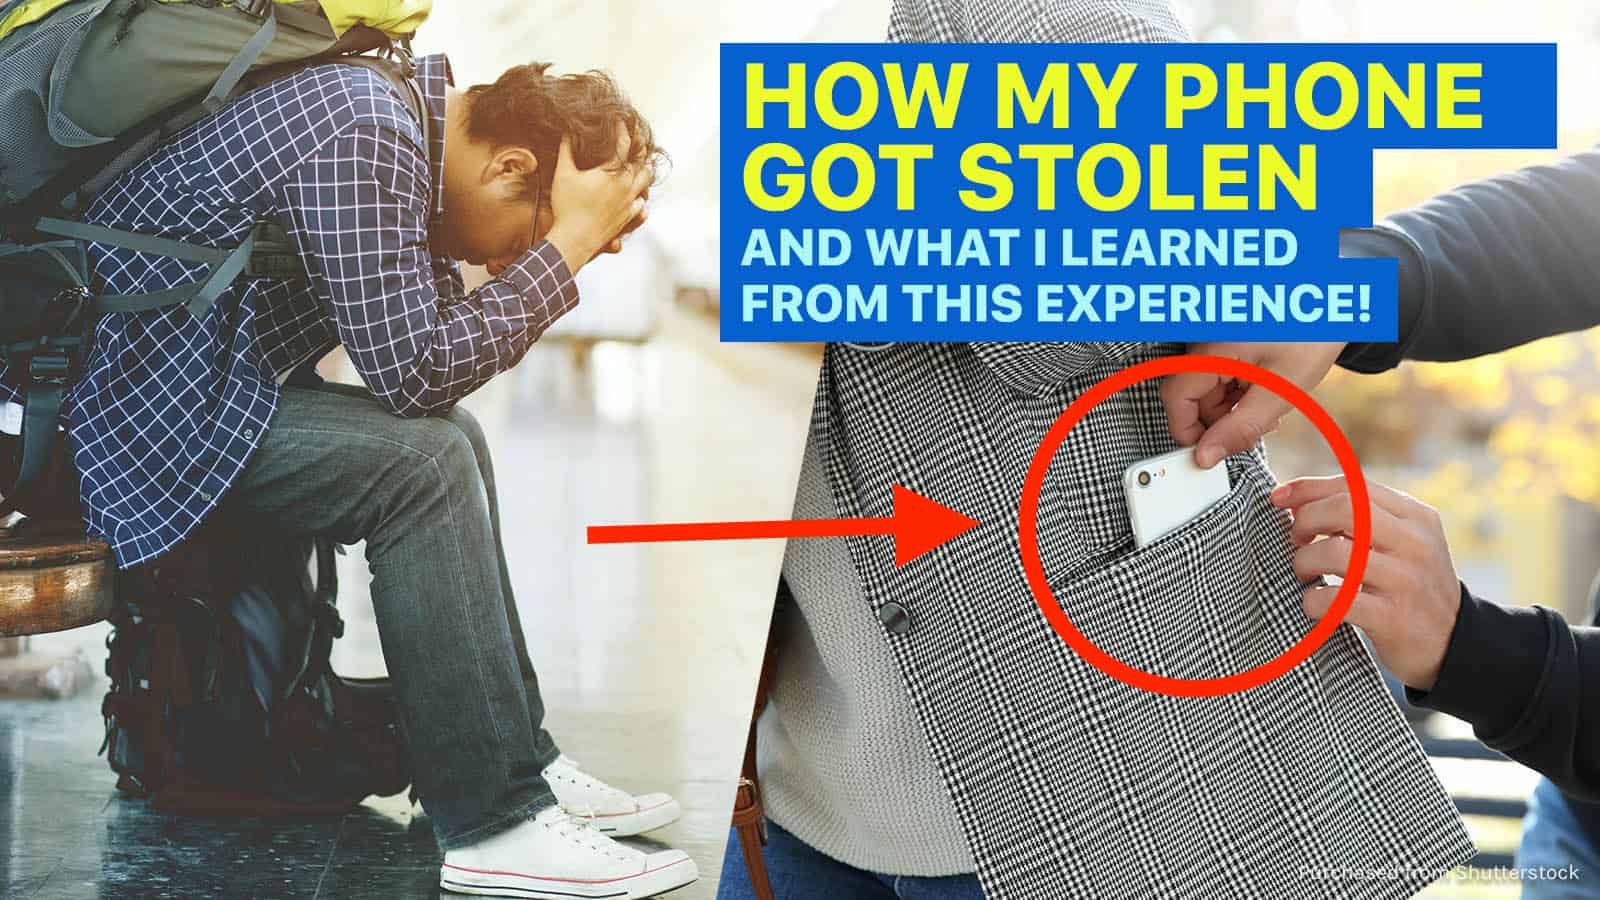 HOW TO AVOID PICKPOCKETS IN EUROPE: 10 Things I Learned from Experience